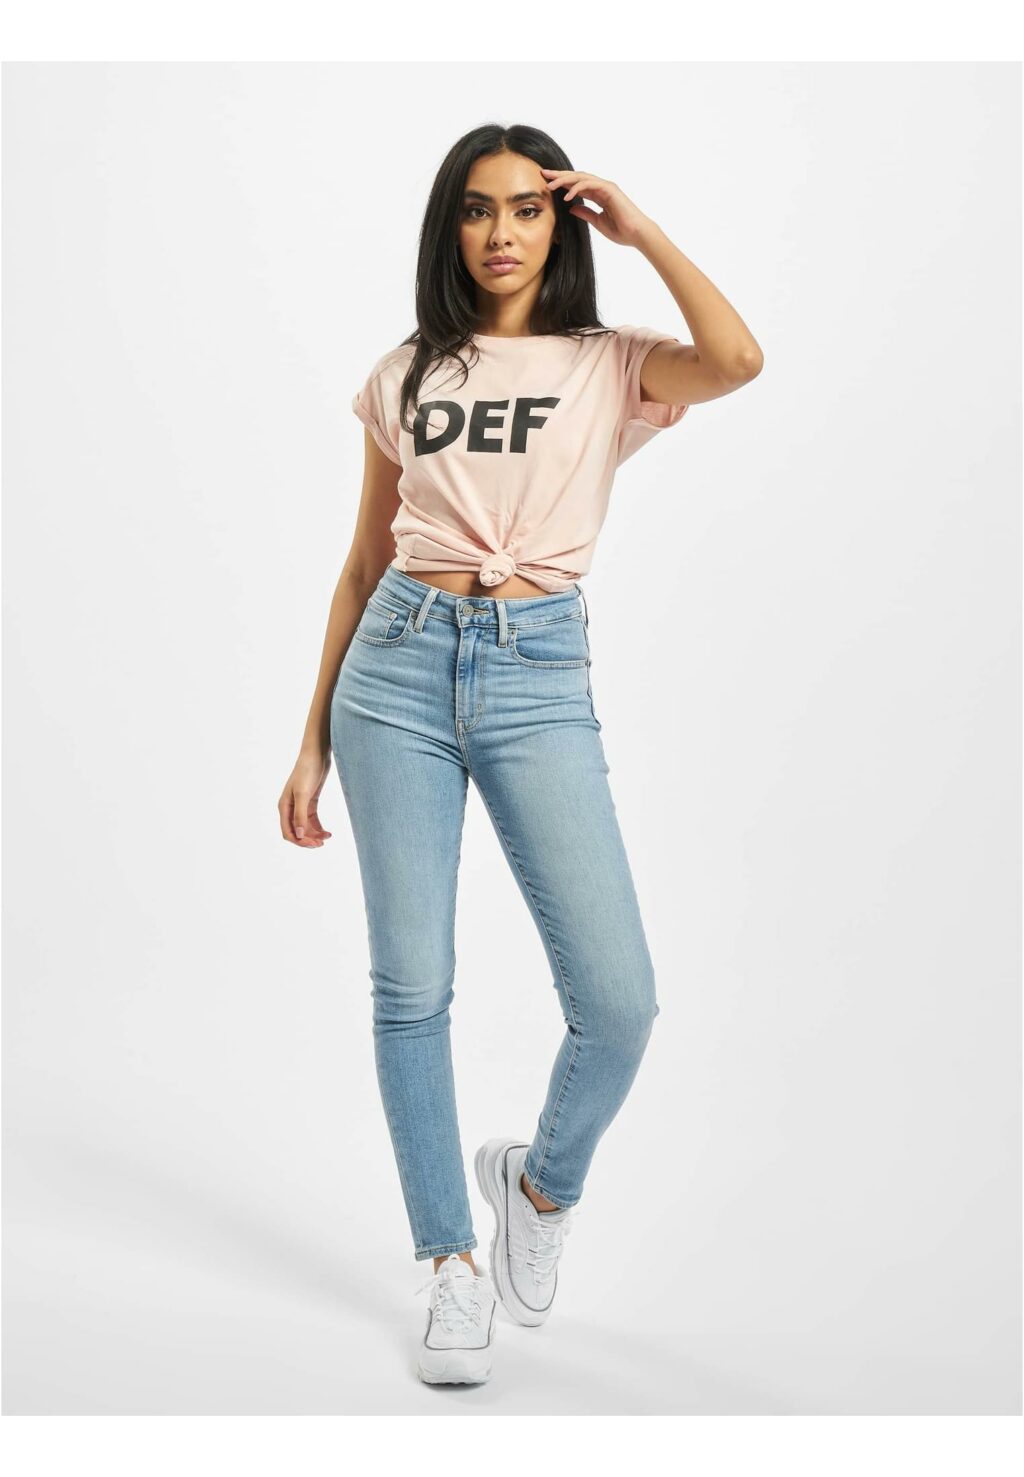 DEF Sizza T-Shirt rose DFTS056